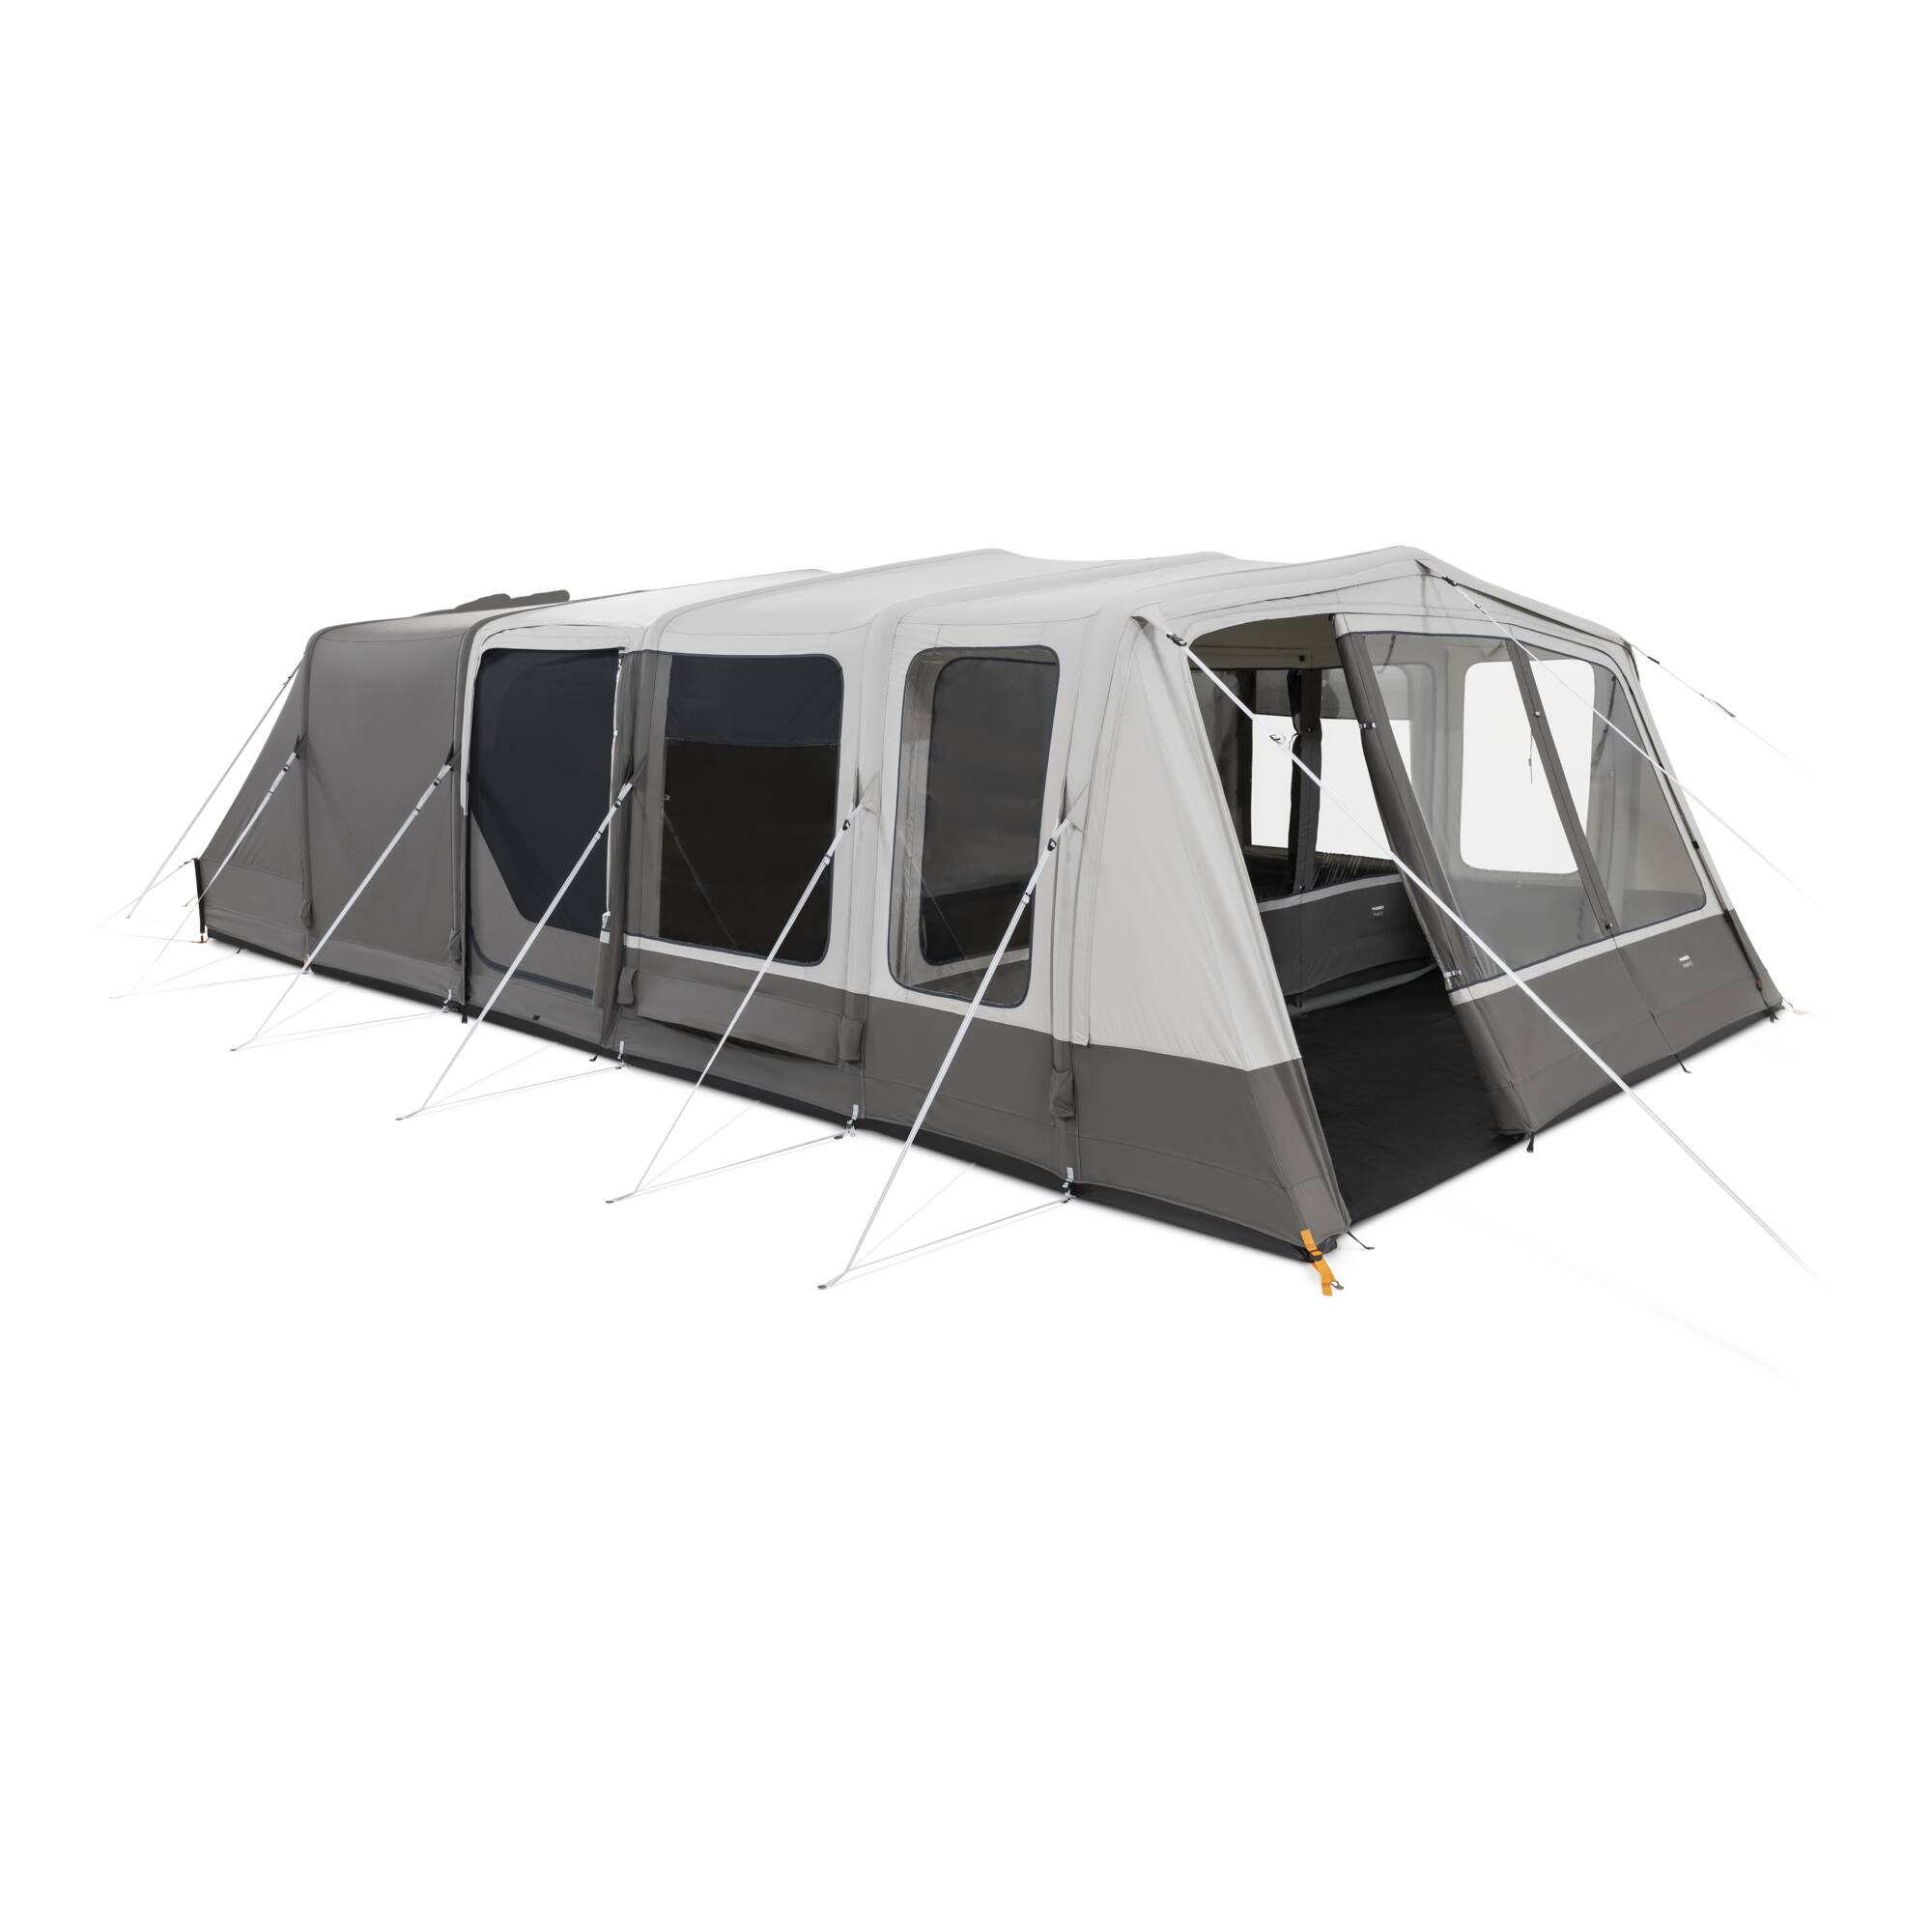 Dometic Ascension Ftx 601 Tent Spare Parts